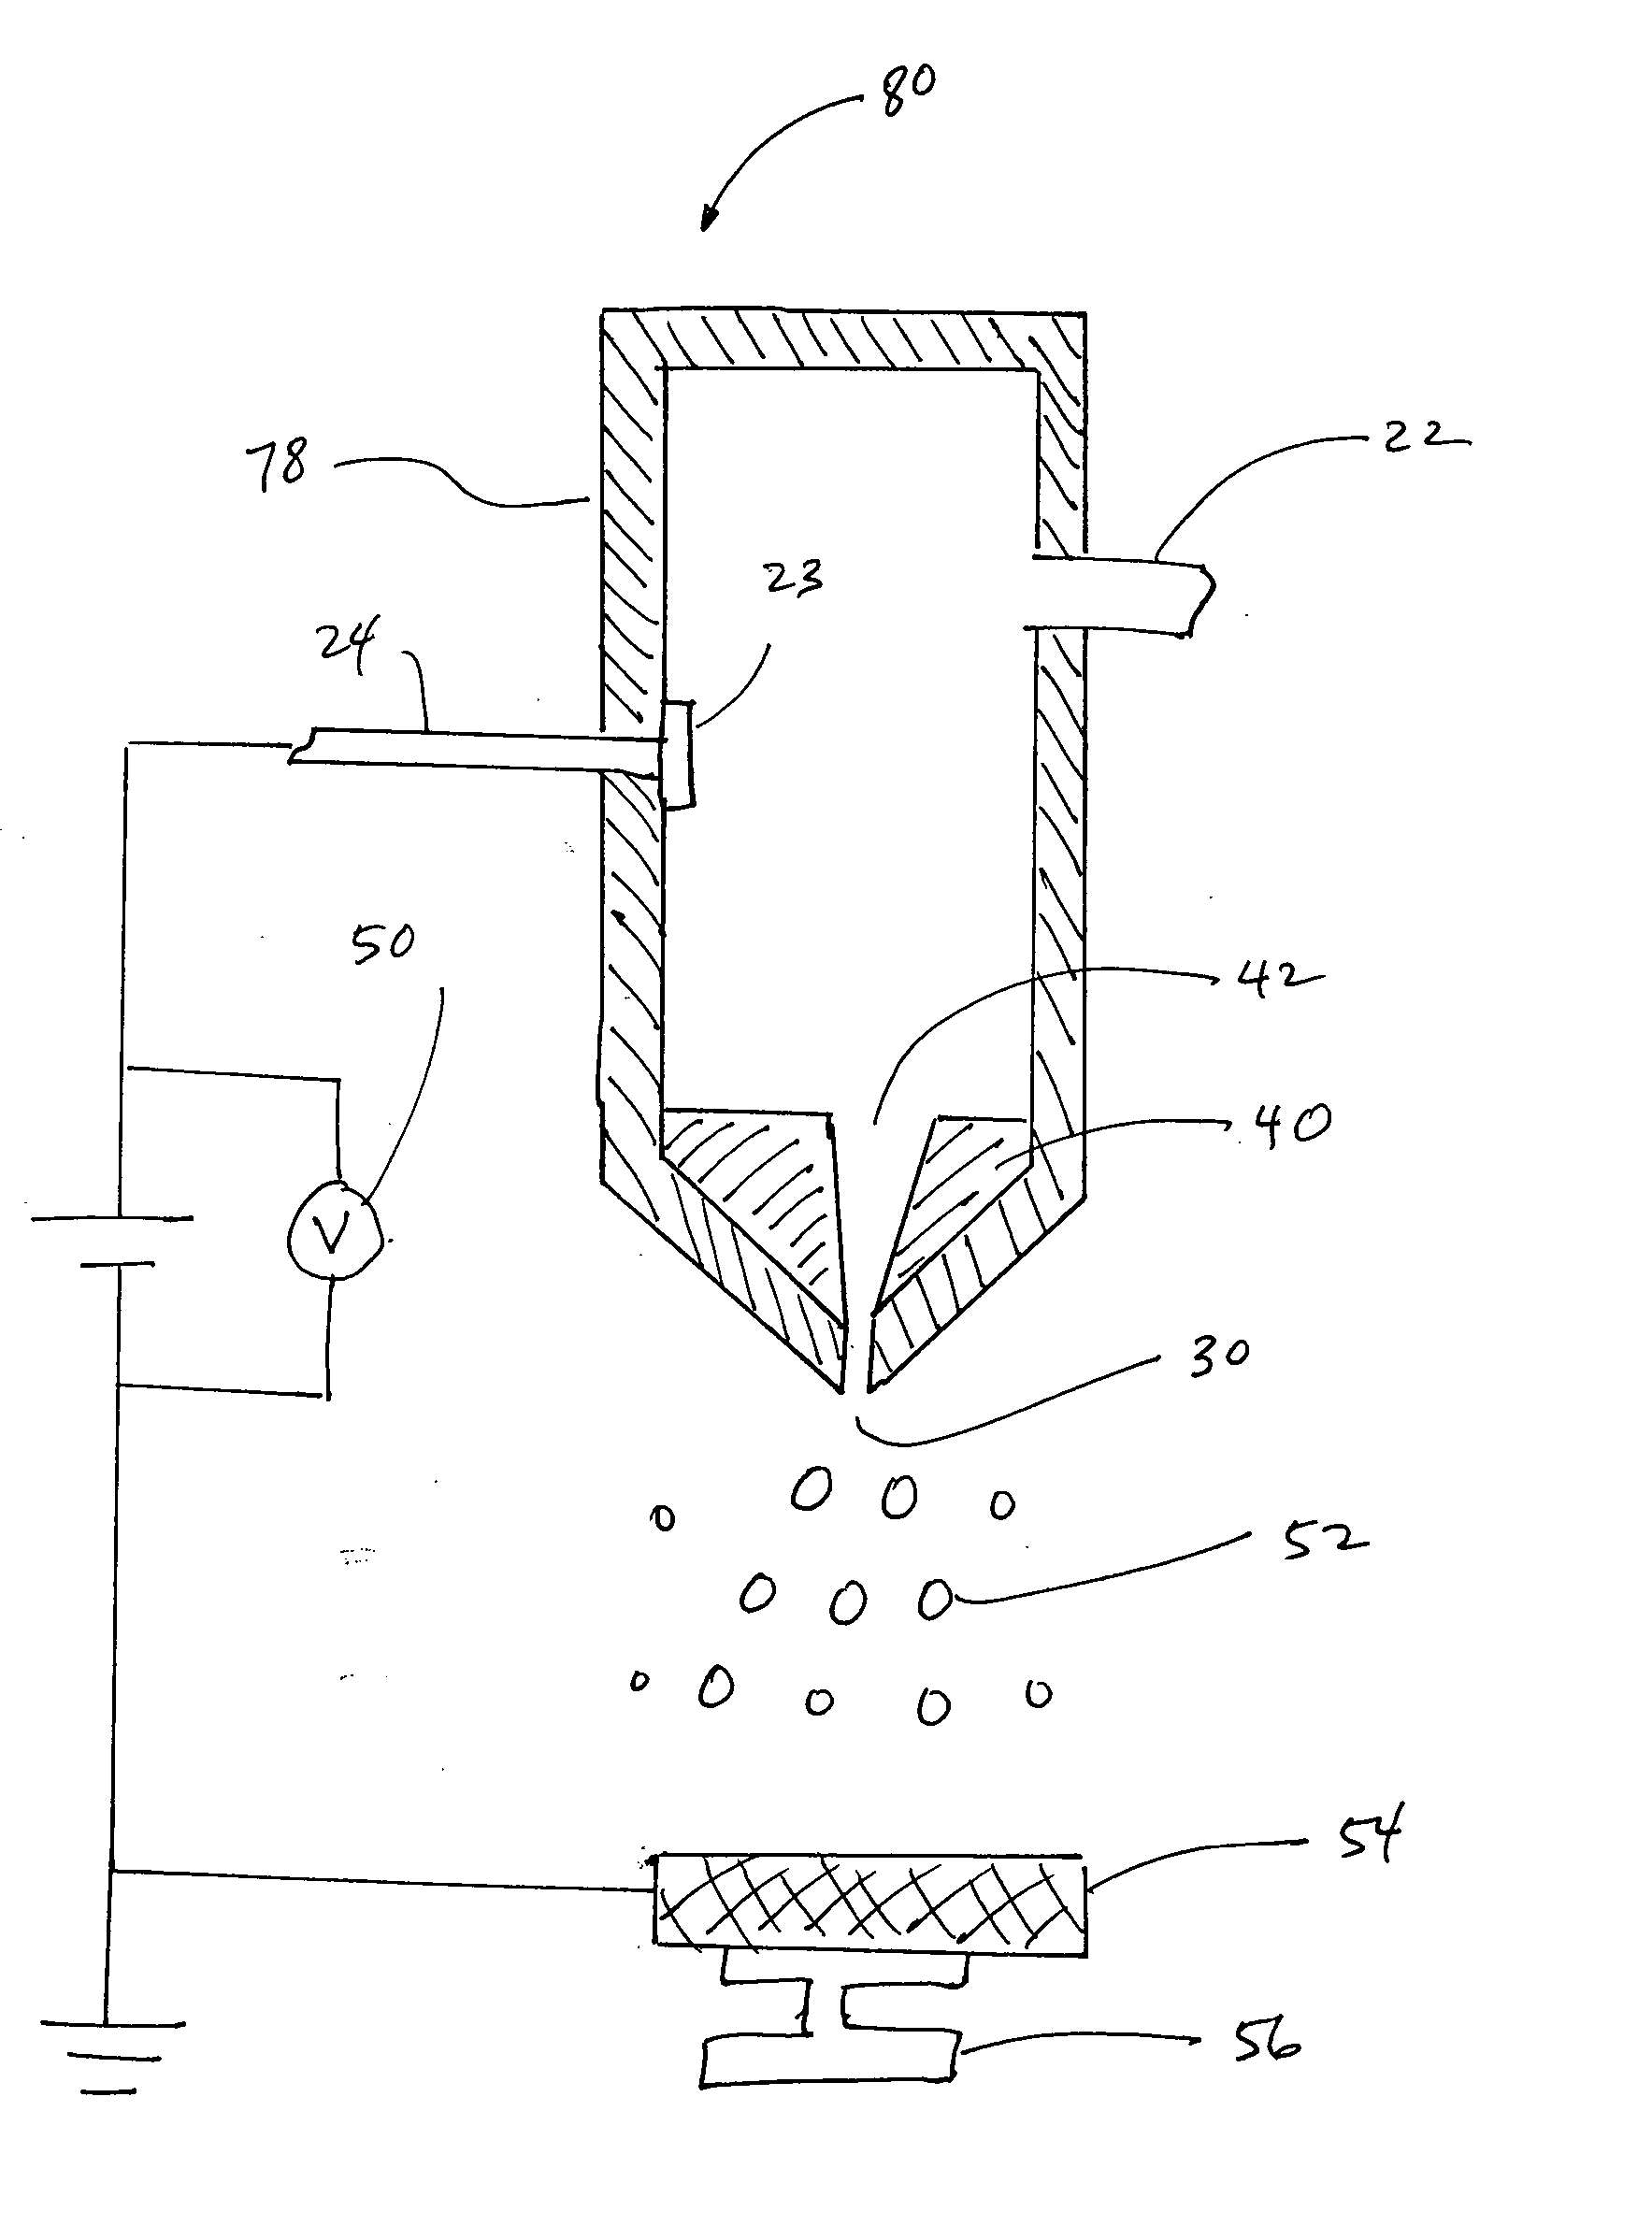 System and method for electrostatic-assisted spray coating of a medical device